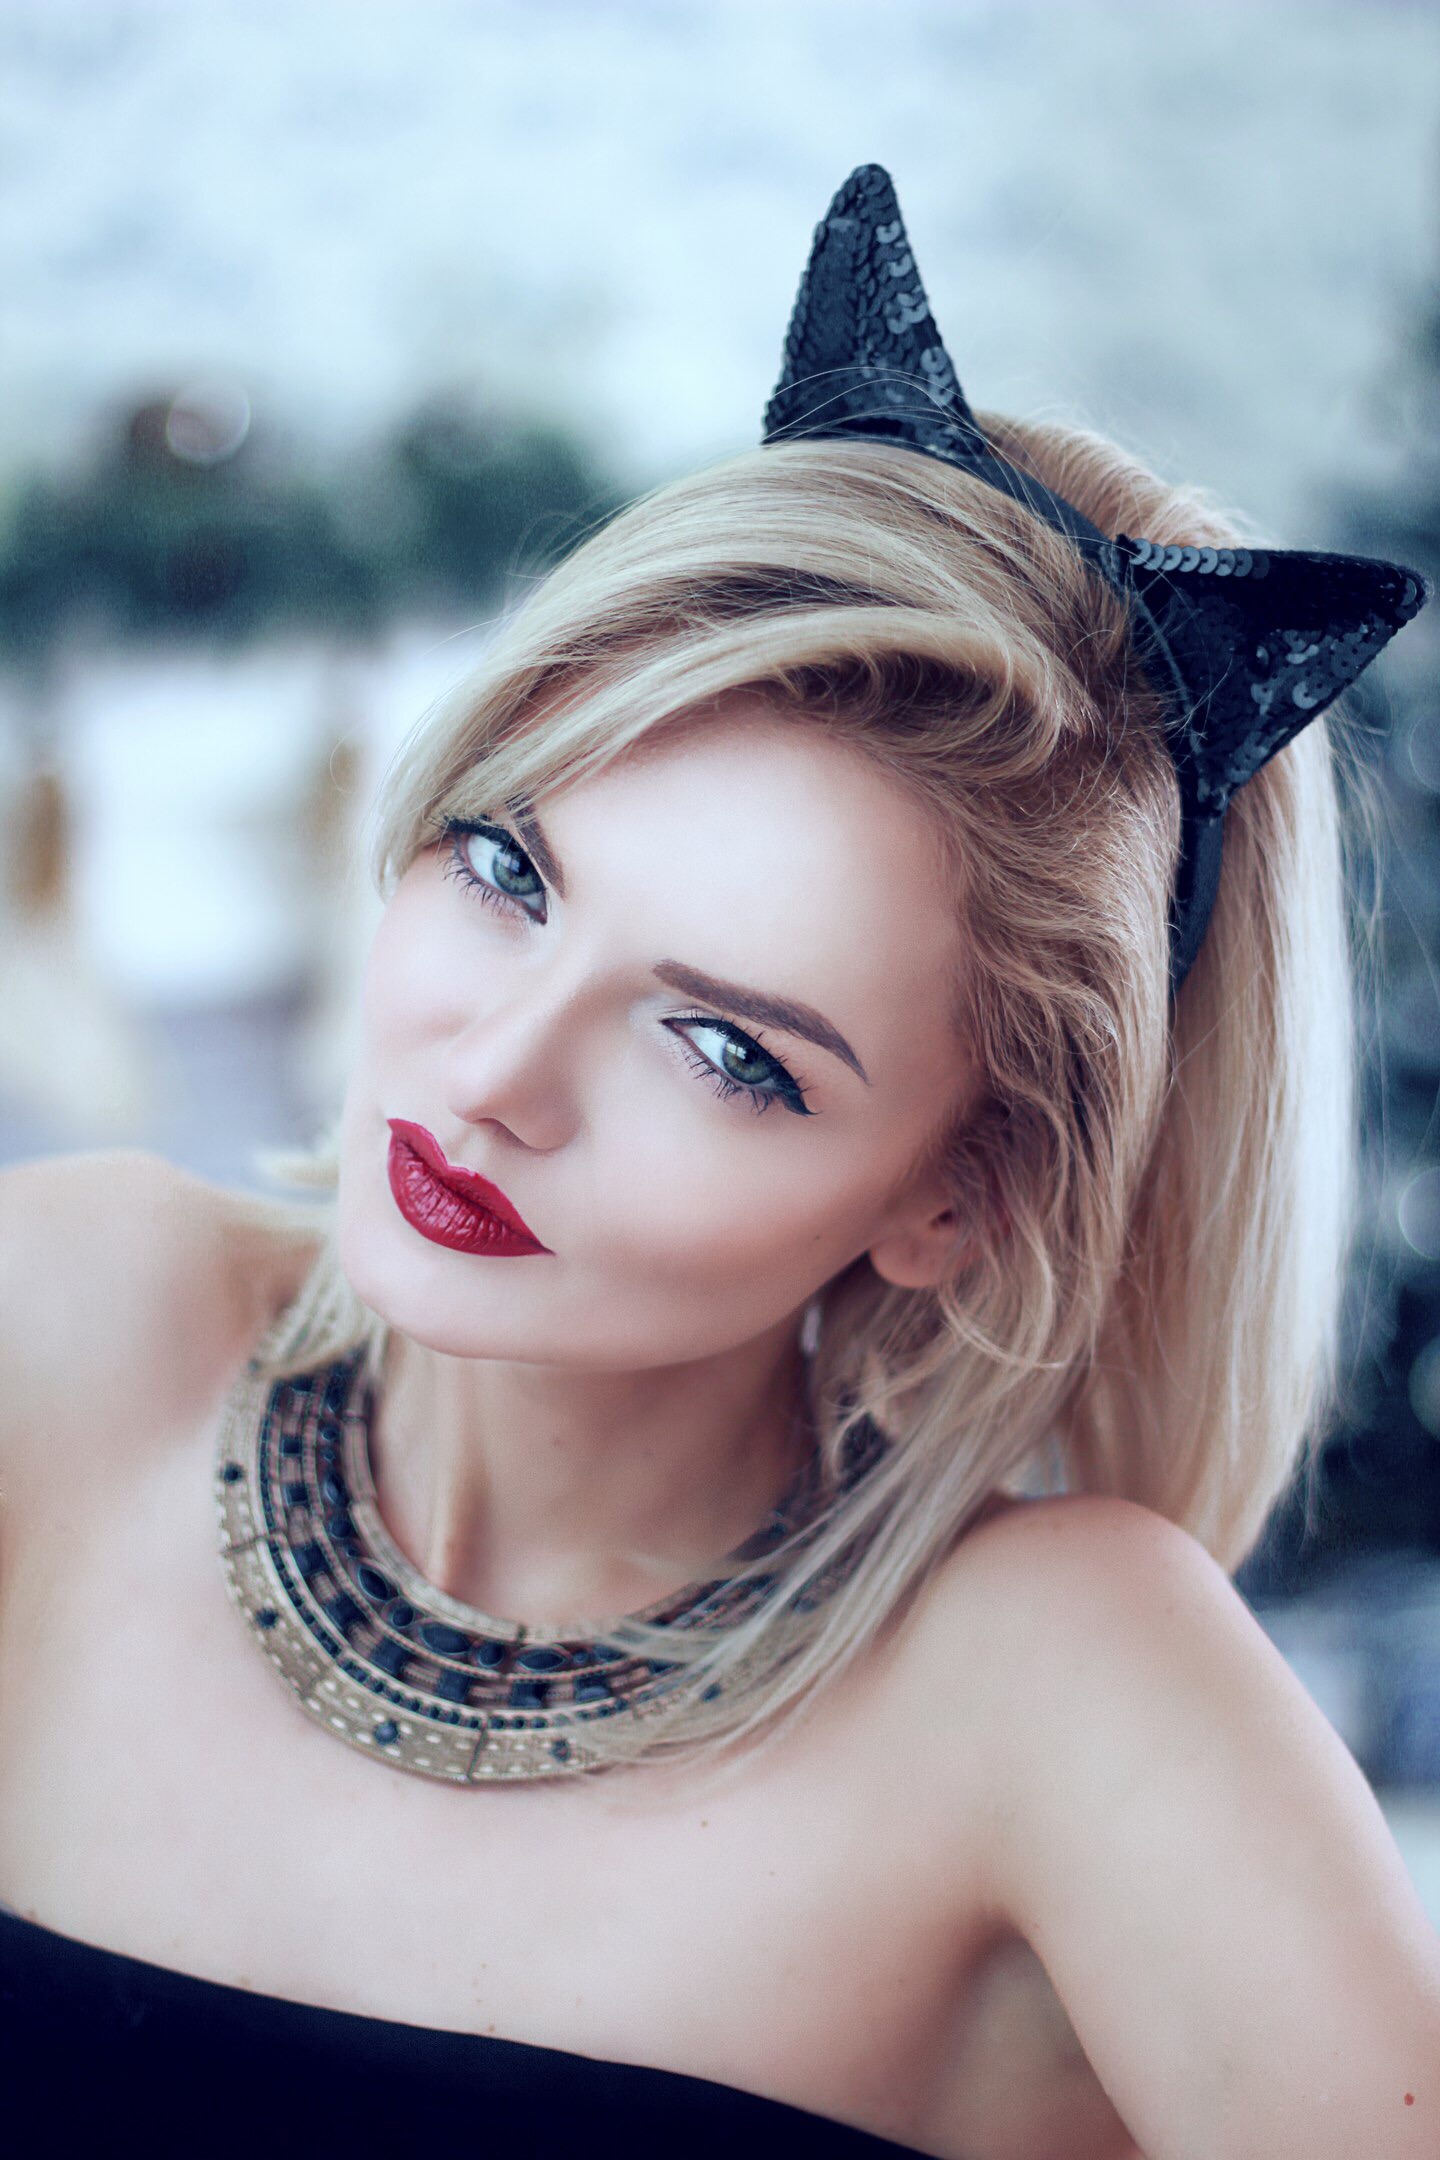 Women Ukrainian Blonde Cat Ears Necklace Strapless Dress Bare Shoulders Red Lipstick Looking At View 1440x2160